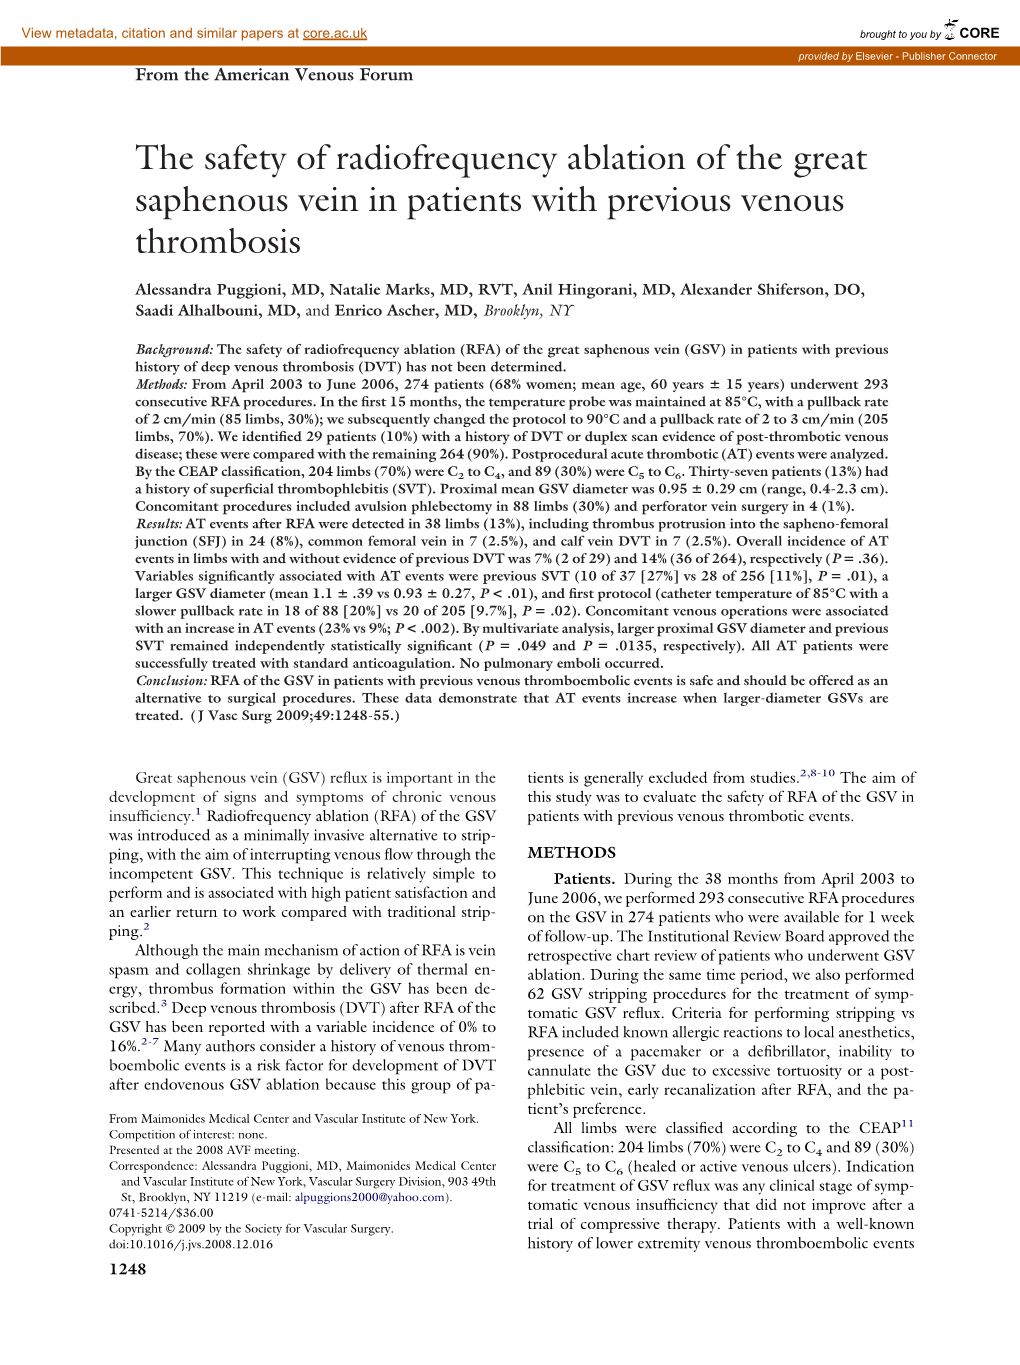 The Safety of Radiofrequency Ablation of the Great Saphenous Vein in Patients with Previous Venous Thrombosis